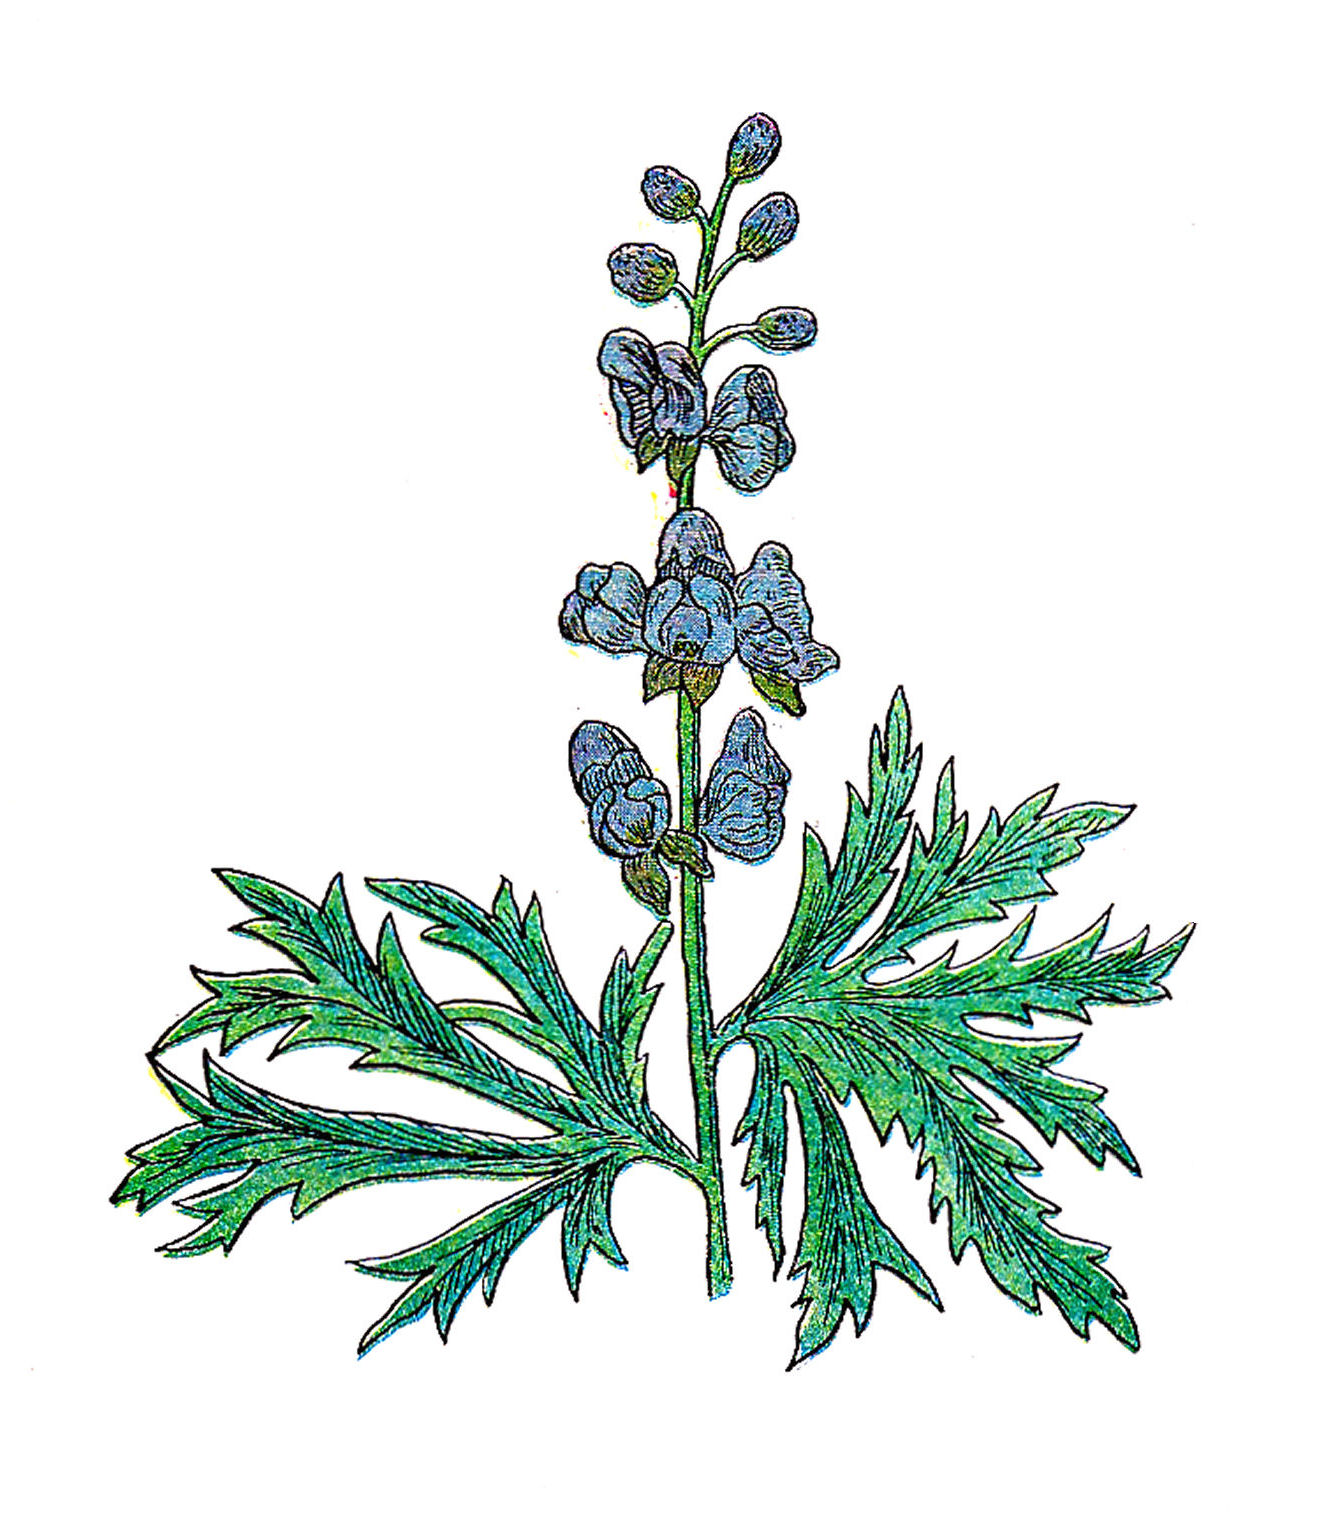 Clip Art  Vintage Illustration Of Wolf S Bane Herb Plant With Flowers